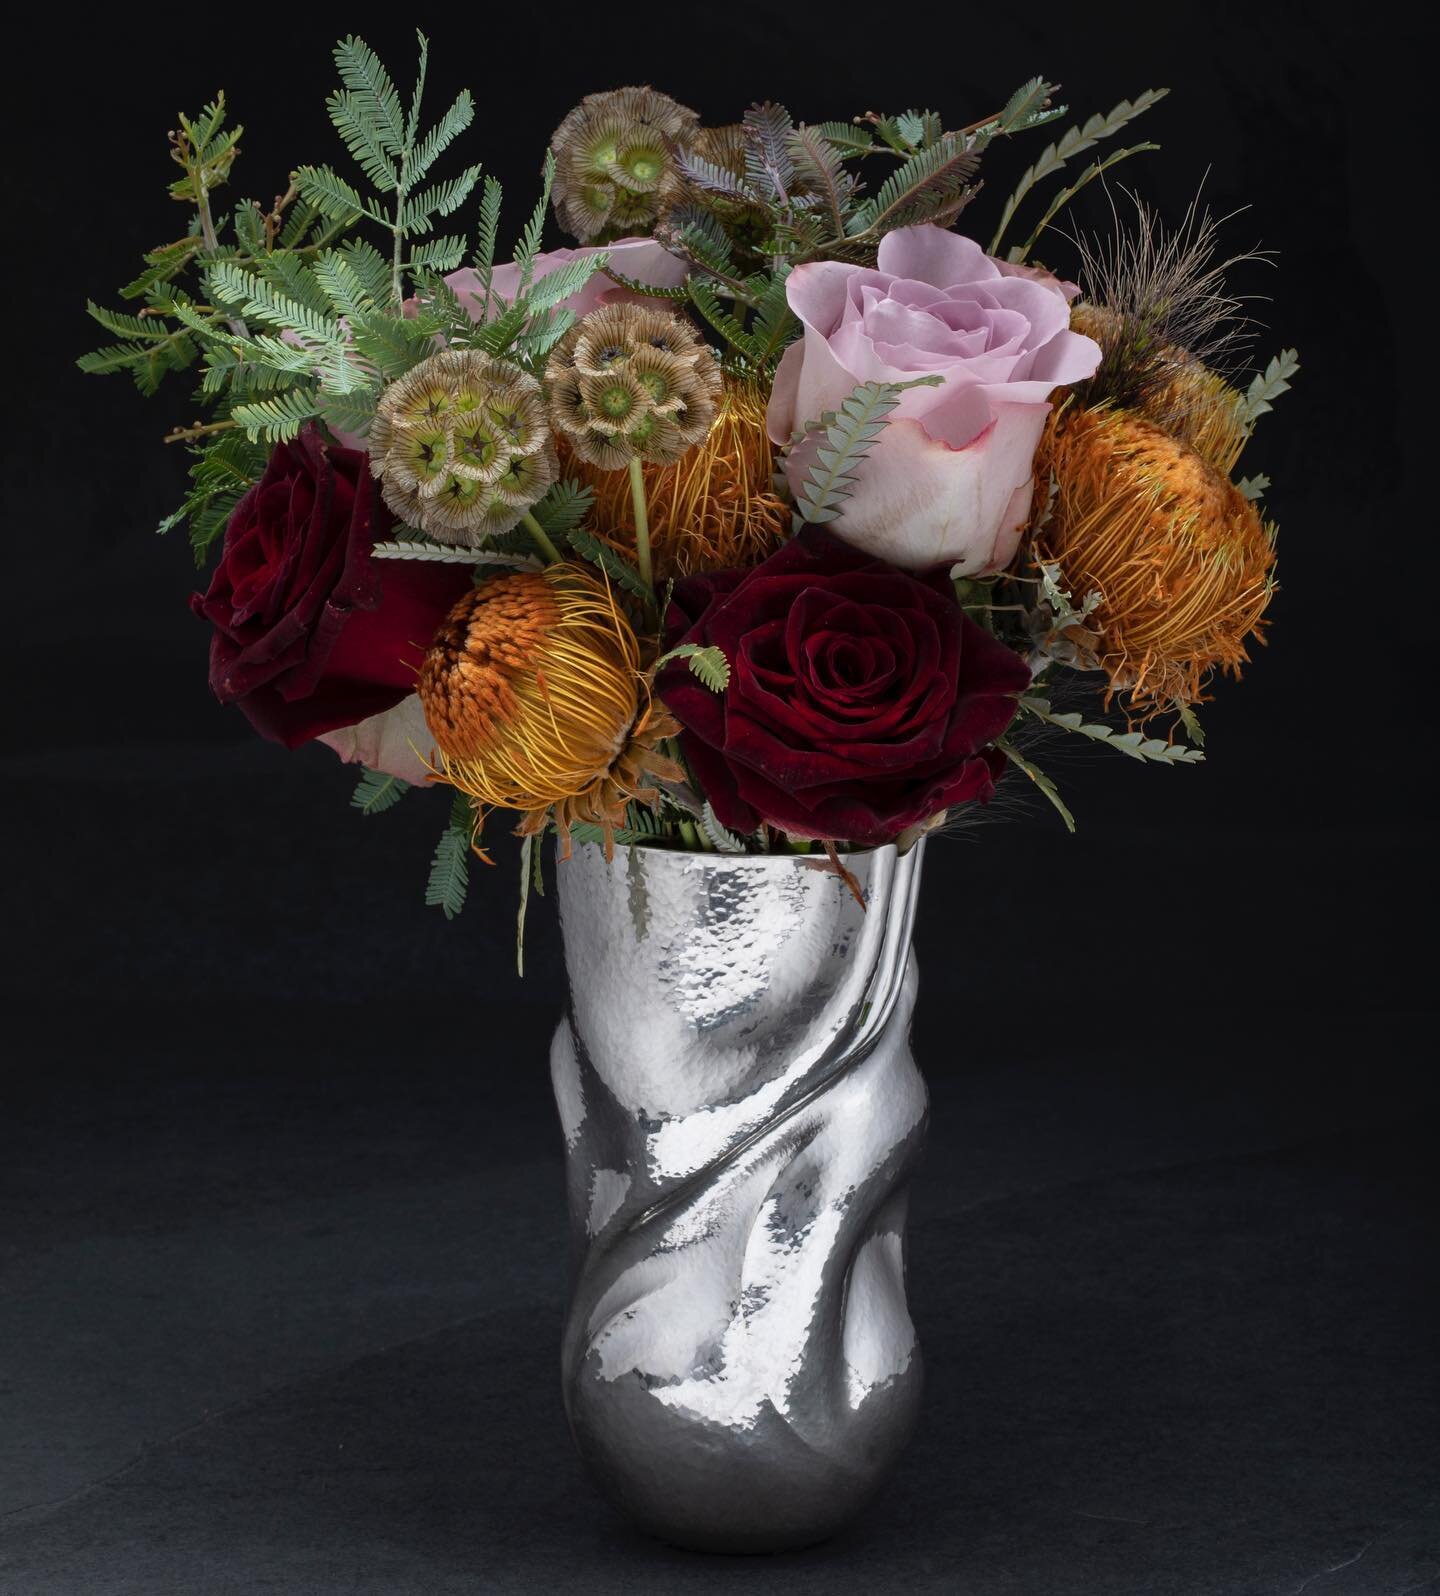 Vase for life - I&rsquo;ve lost count of the number of glass vases I&rsquo;ve chipped or smashed over the years... this exquisite Mini Maria vase by Elizabeth Auriol Peers solves all that - and is a beautiful sculptural piece when empty! Elizabeth&rs